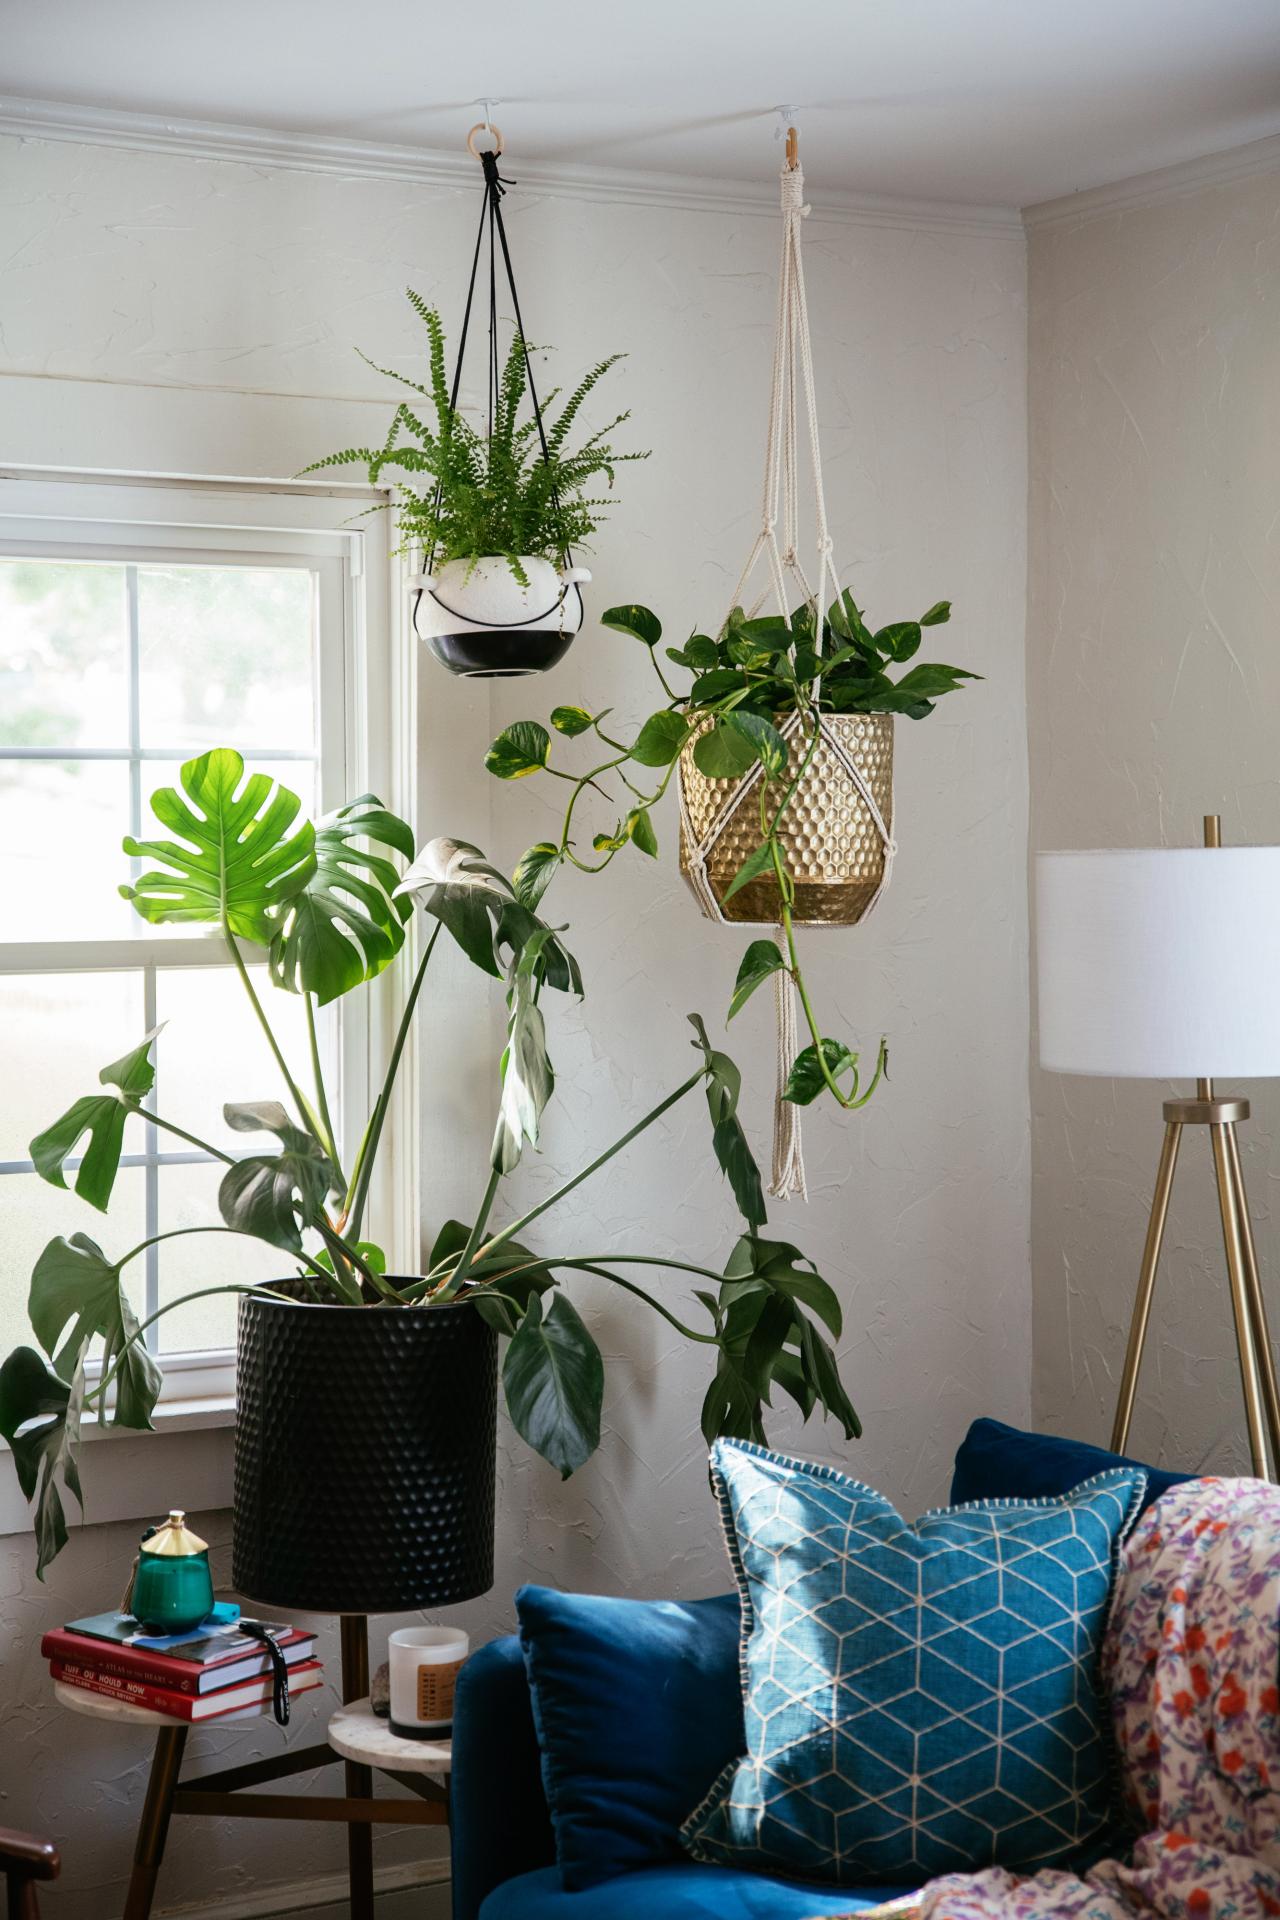 How to Hang Plants from Ceiling | HGTV